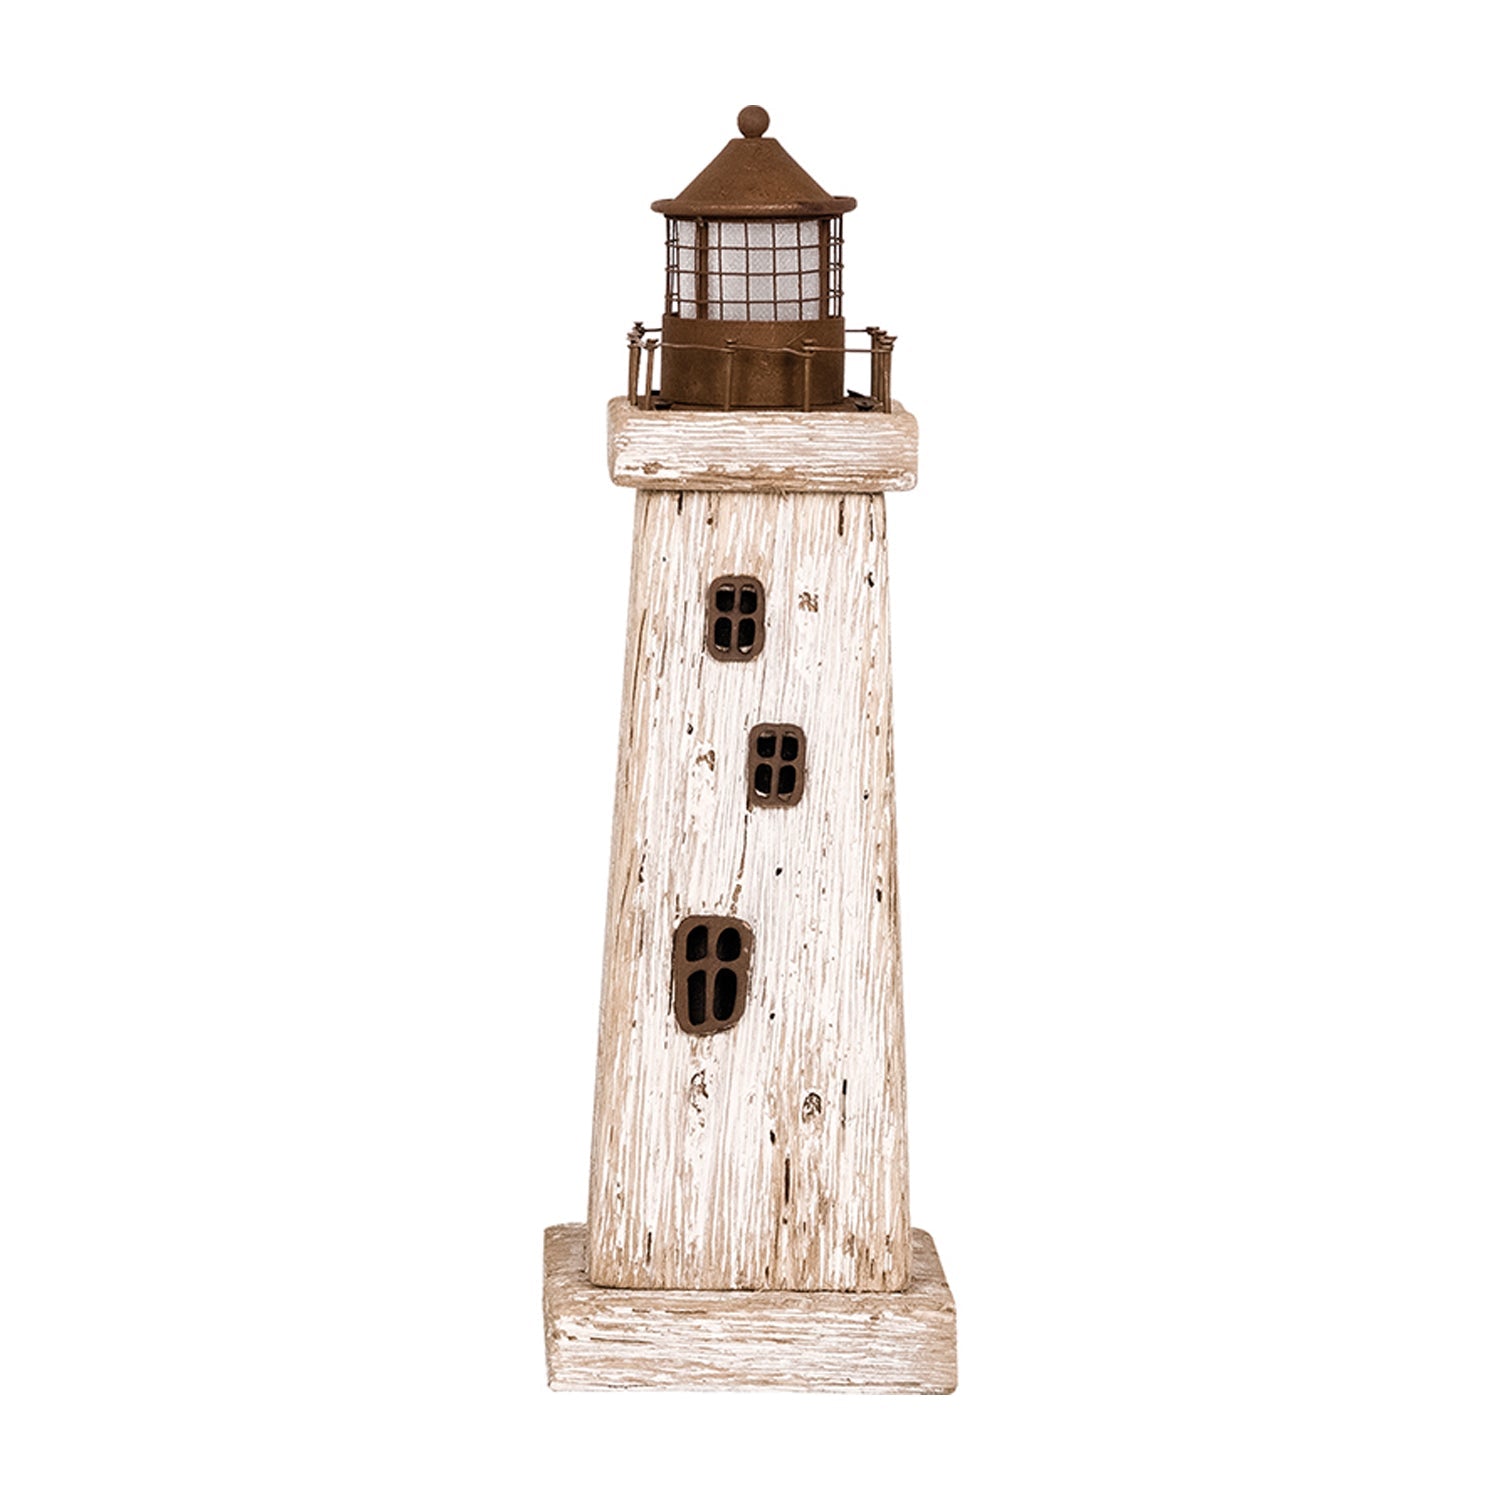 BOY LIGHTHOUSE WITH WOODEN LIGHT